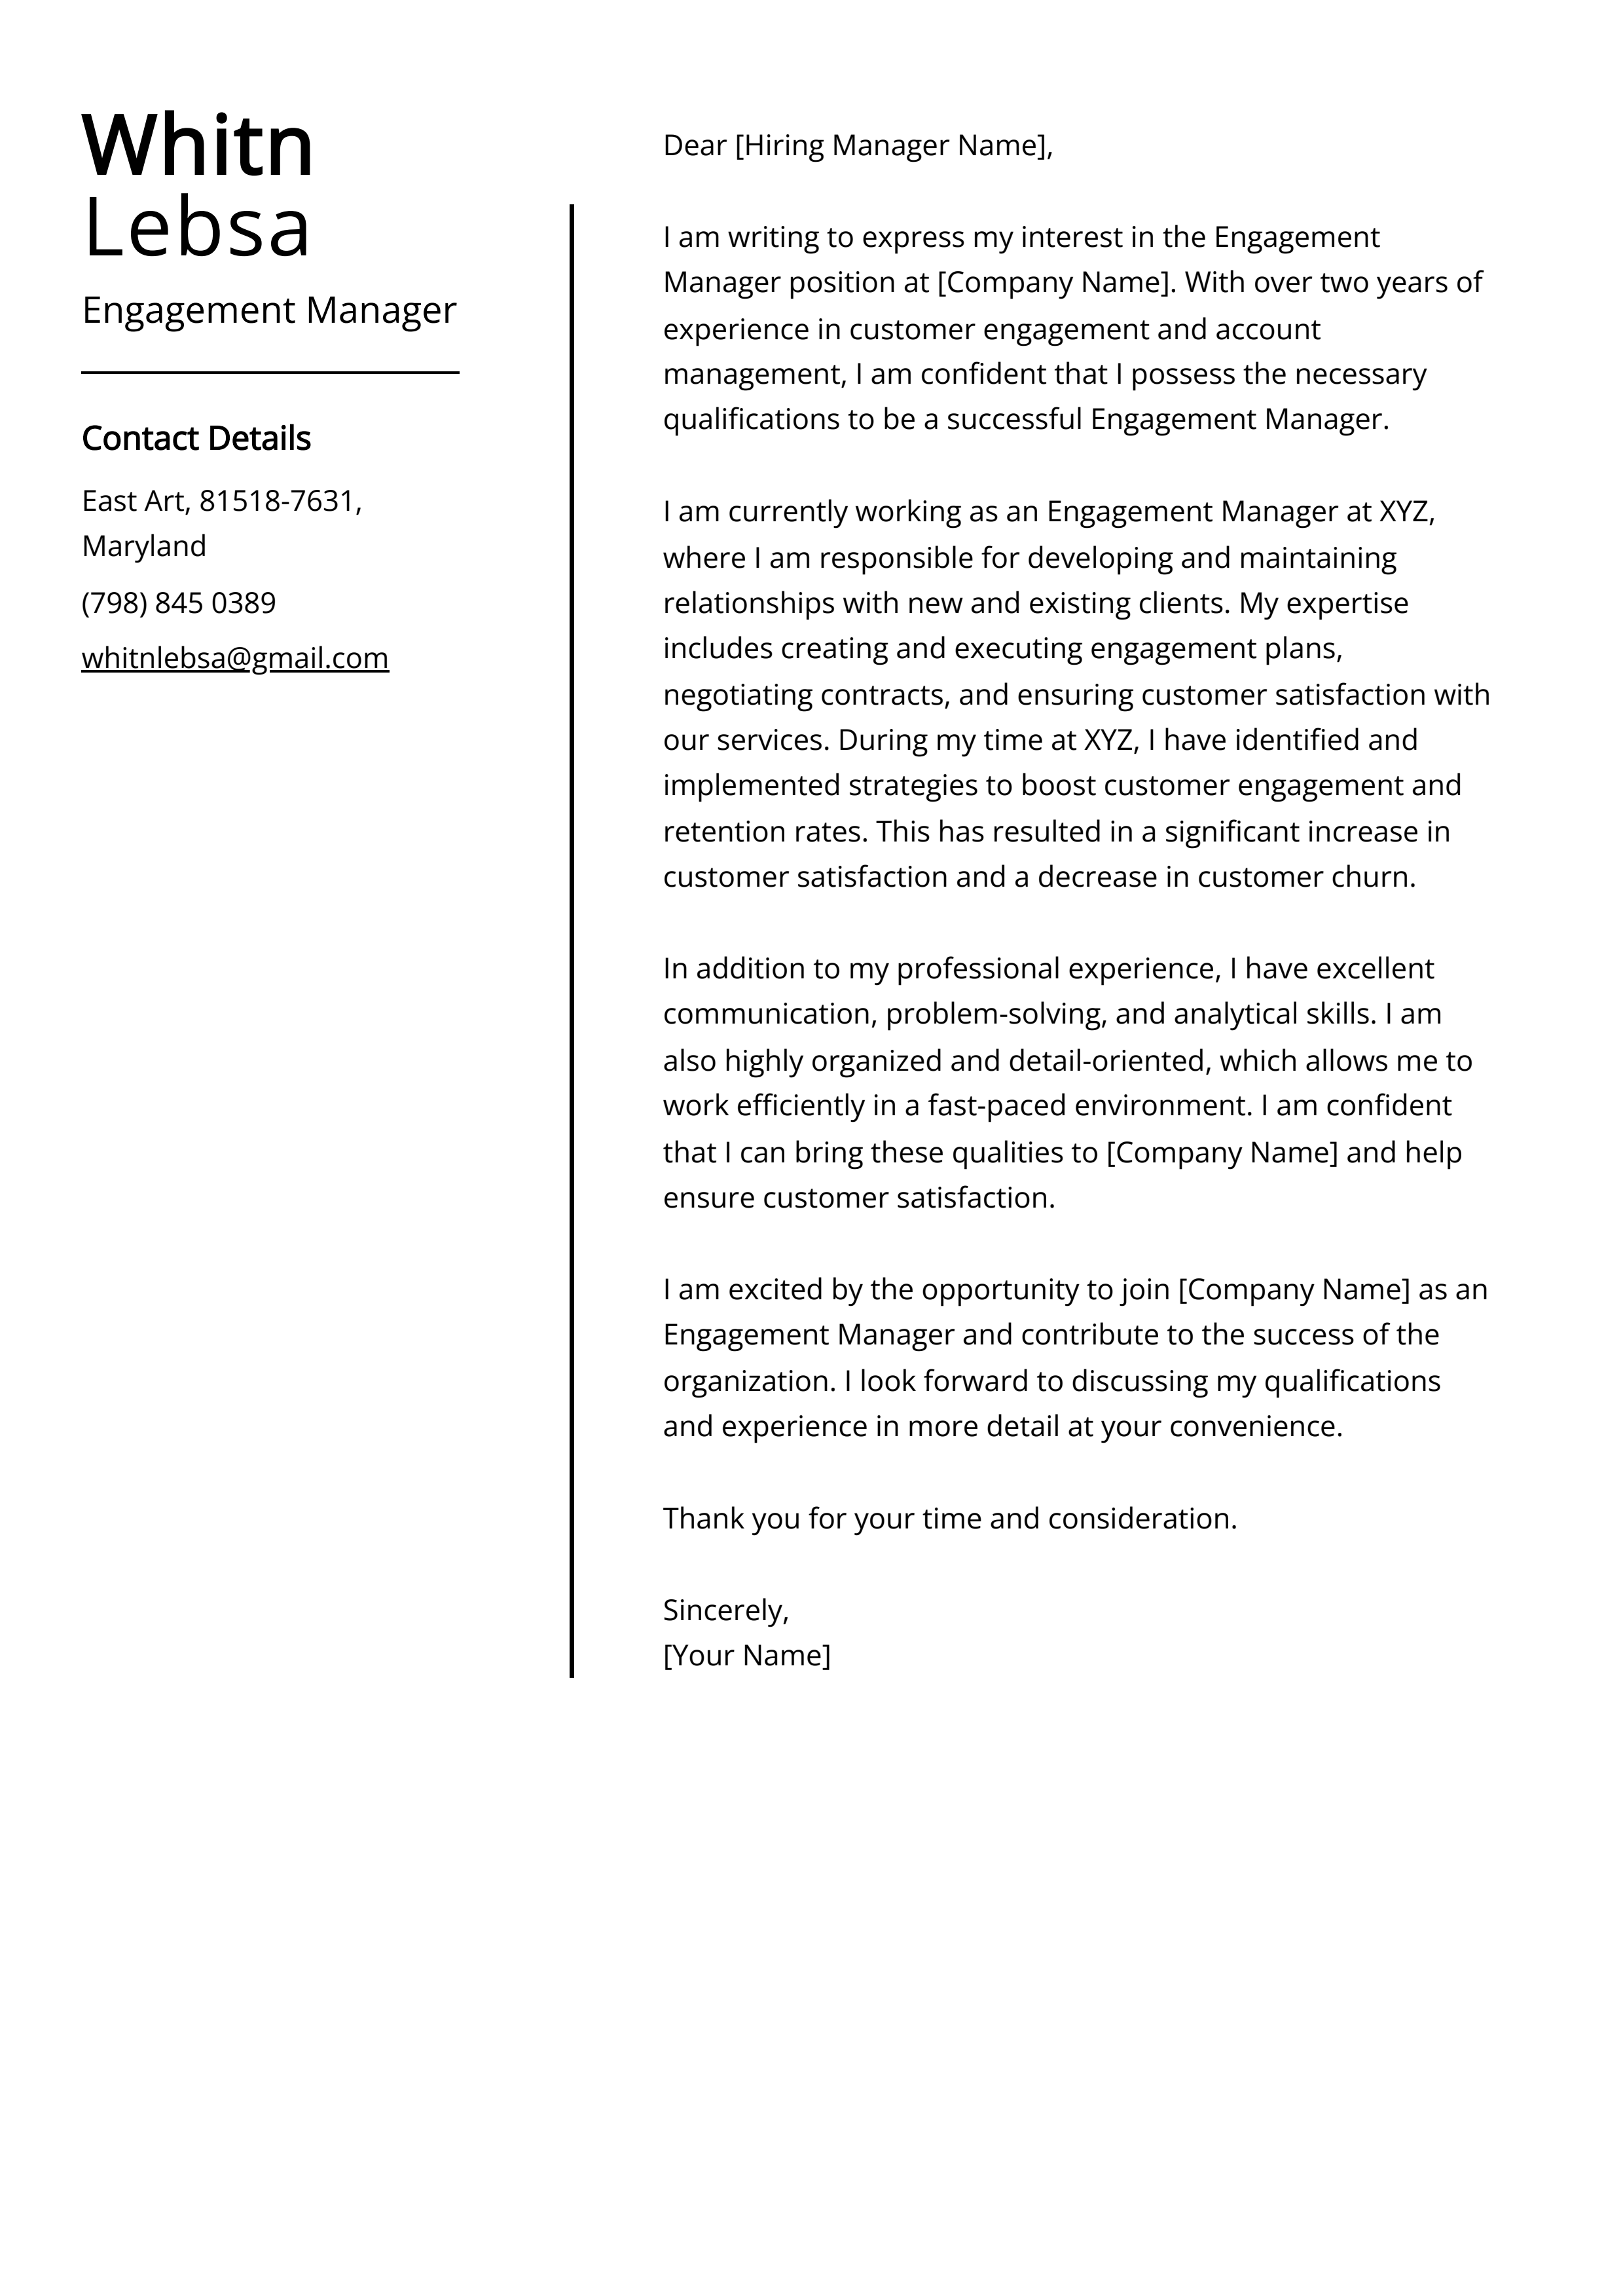 Engagement Manager Cover Letter Example